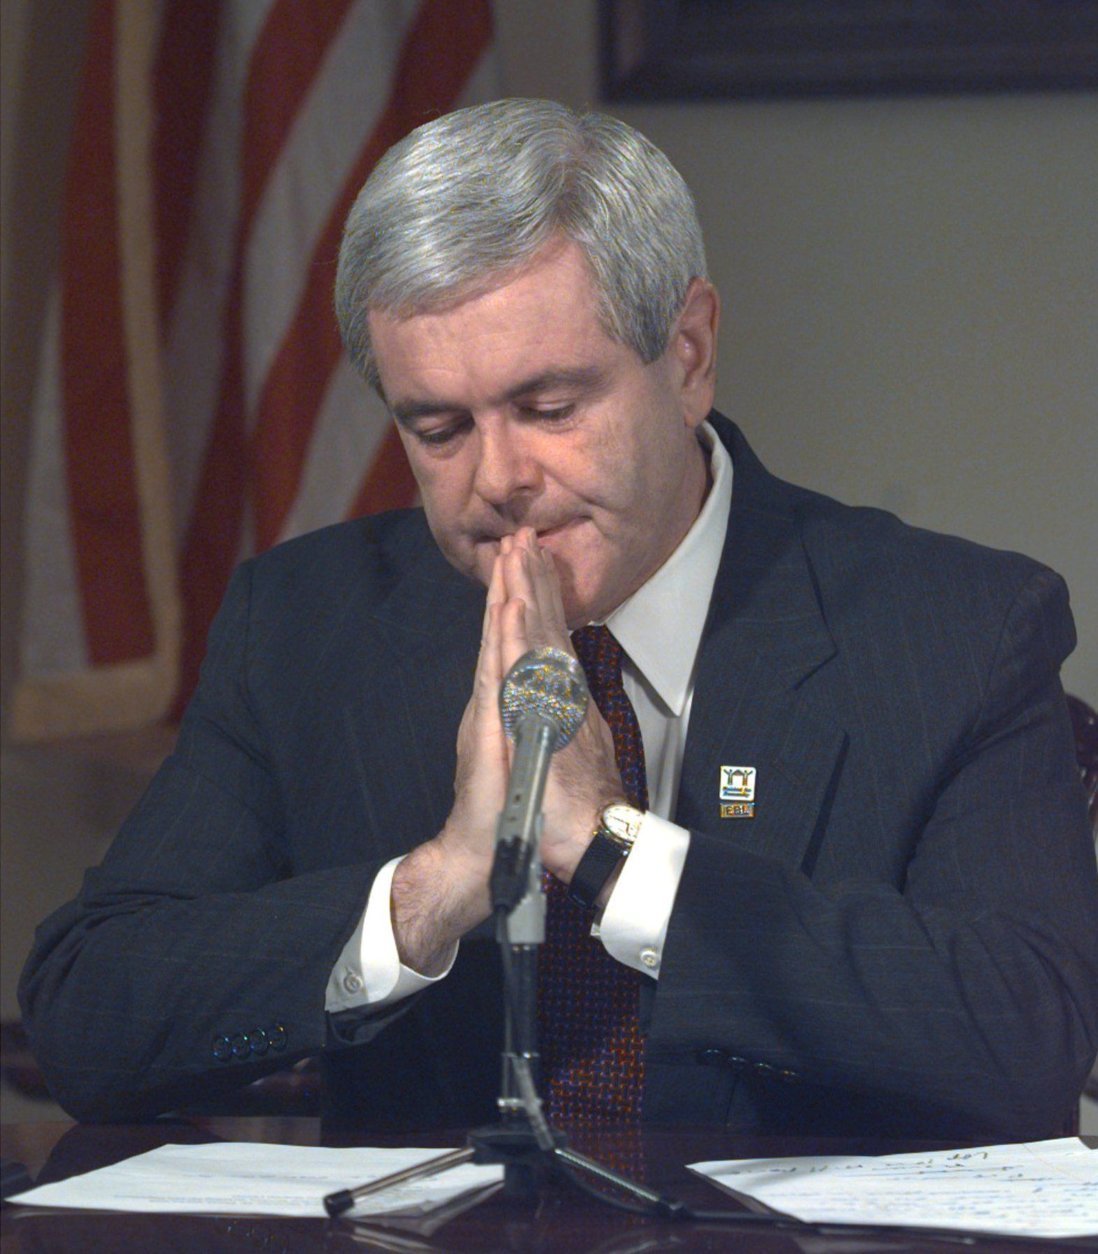 House Speaker Newt Gingrich speaks during a weekly GOP radio address in his Capitol office Saturday, July 25, 1998, in Washington.  With a tear running down his right cheek, Gingrich bowed his head in prayer. "Please help this country learn to live with its freedom," he said.  Investigators are trying to learn how and why the gunman stormed the Capitol building filled with lawmakers and tourists, and opened fire before being shot and captured. A tourist was wounded in the fire fight. (AP Photo/Harry Hamburg, Pool)